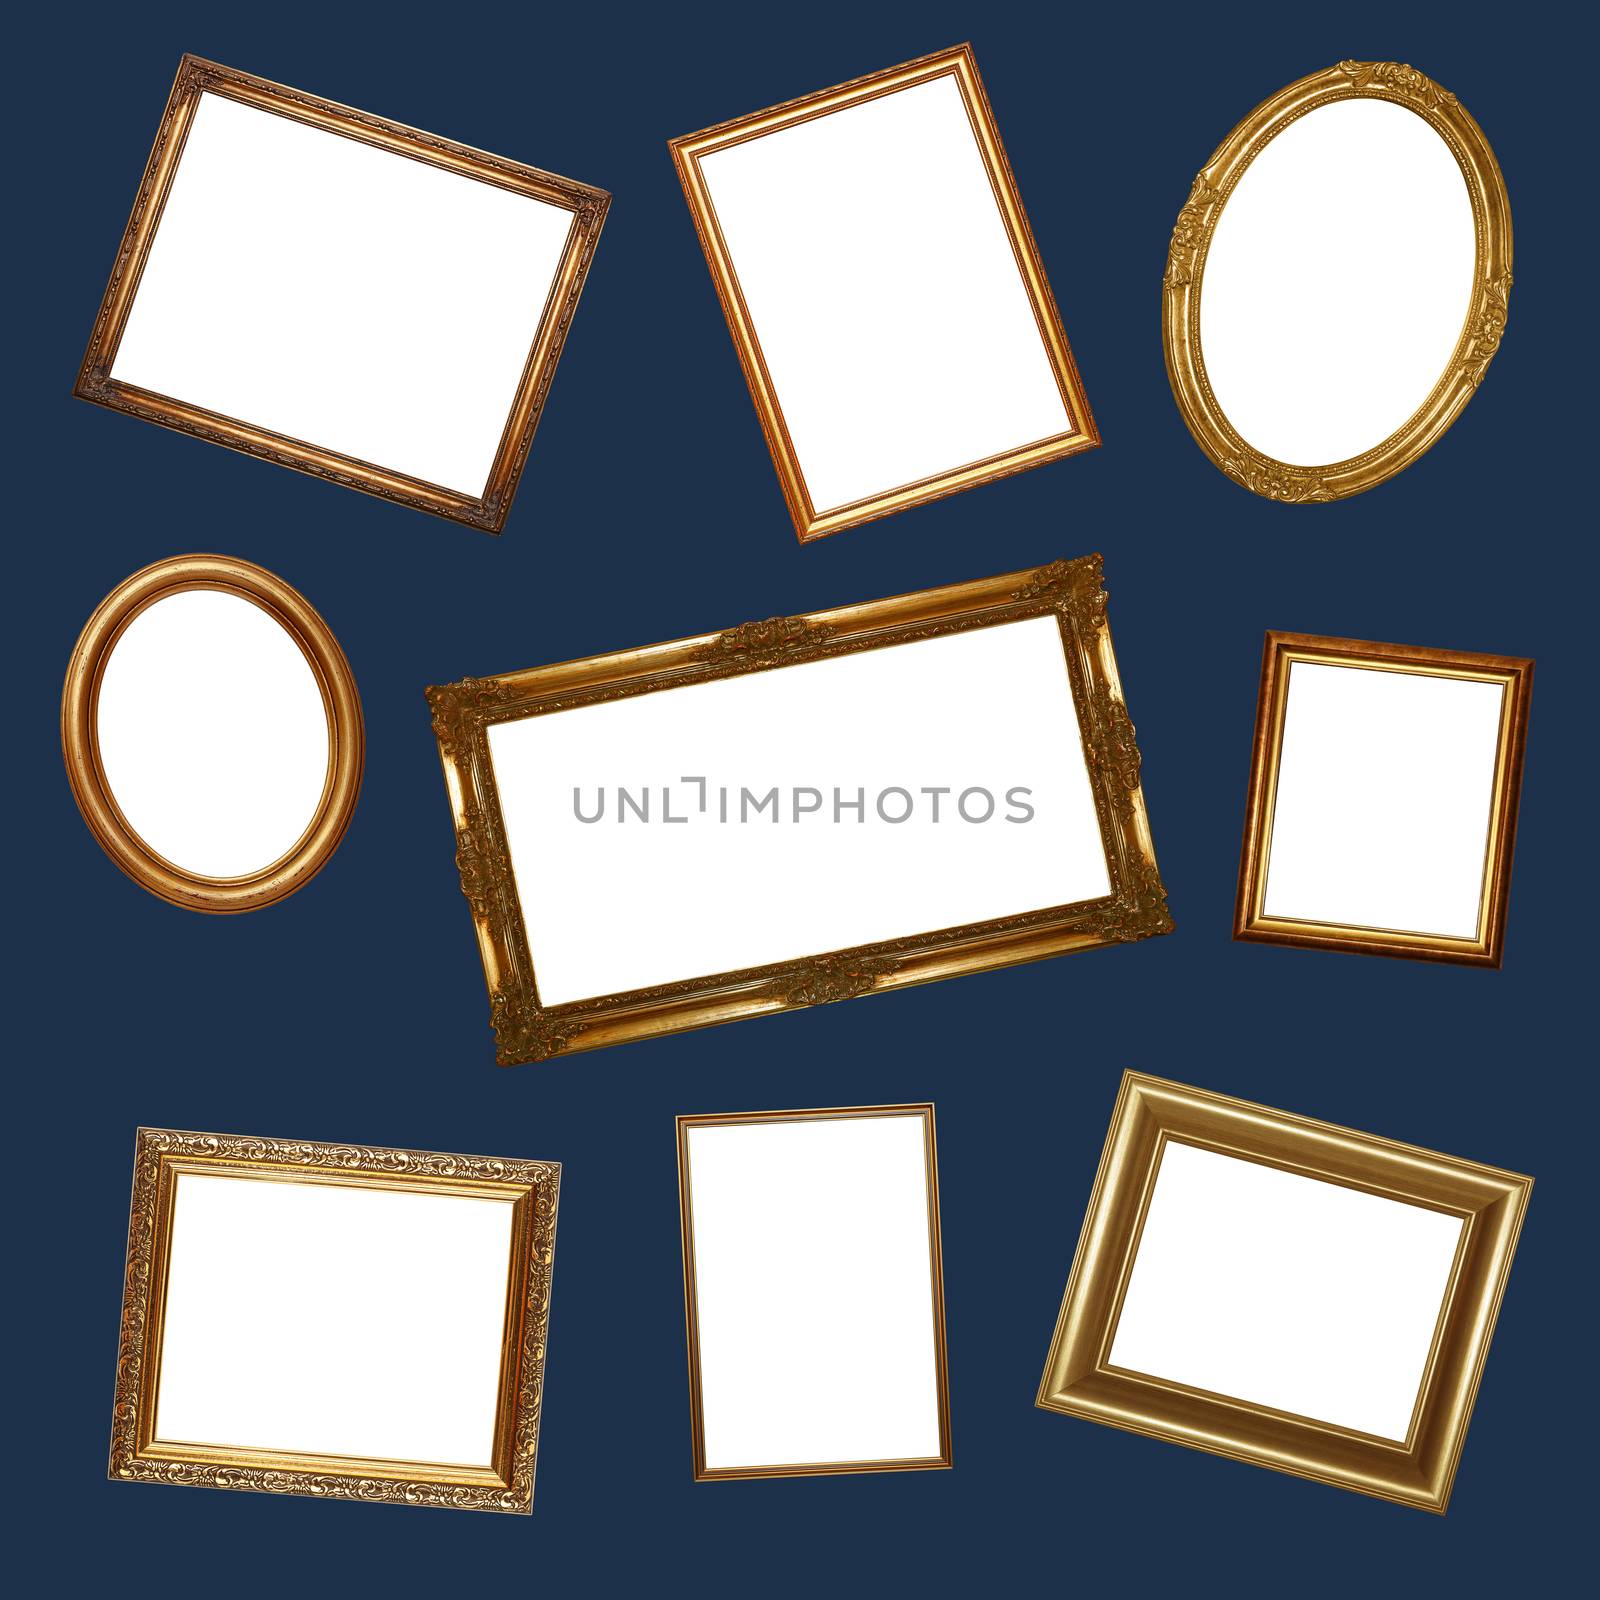 Pattern of many different empty baroque style golden picture frames over dark blue background